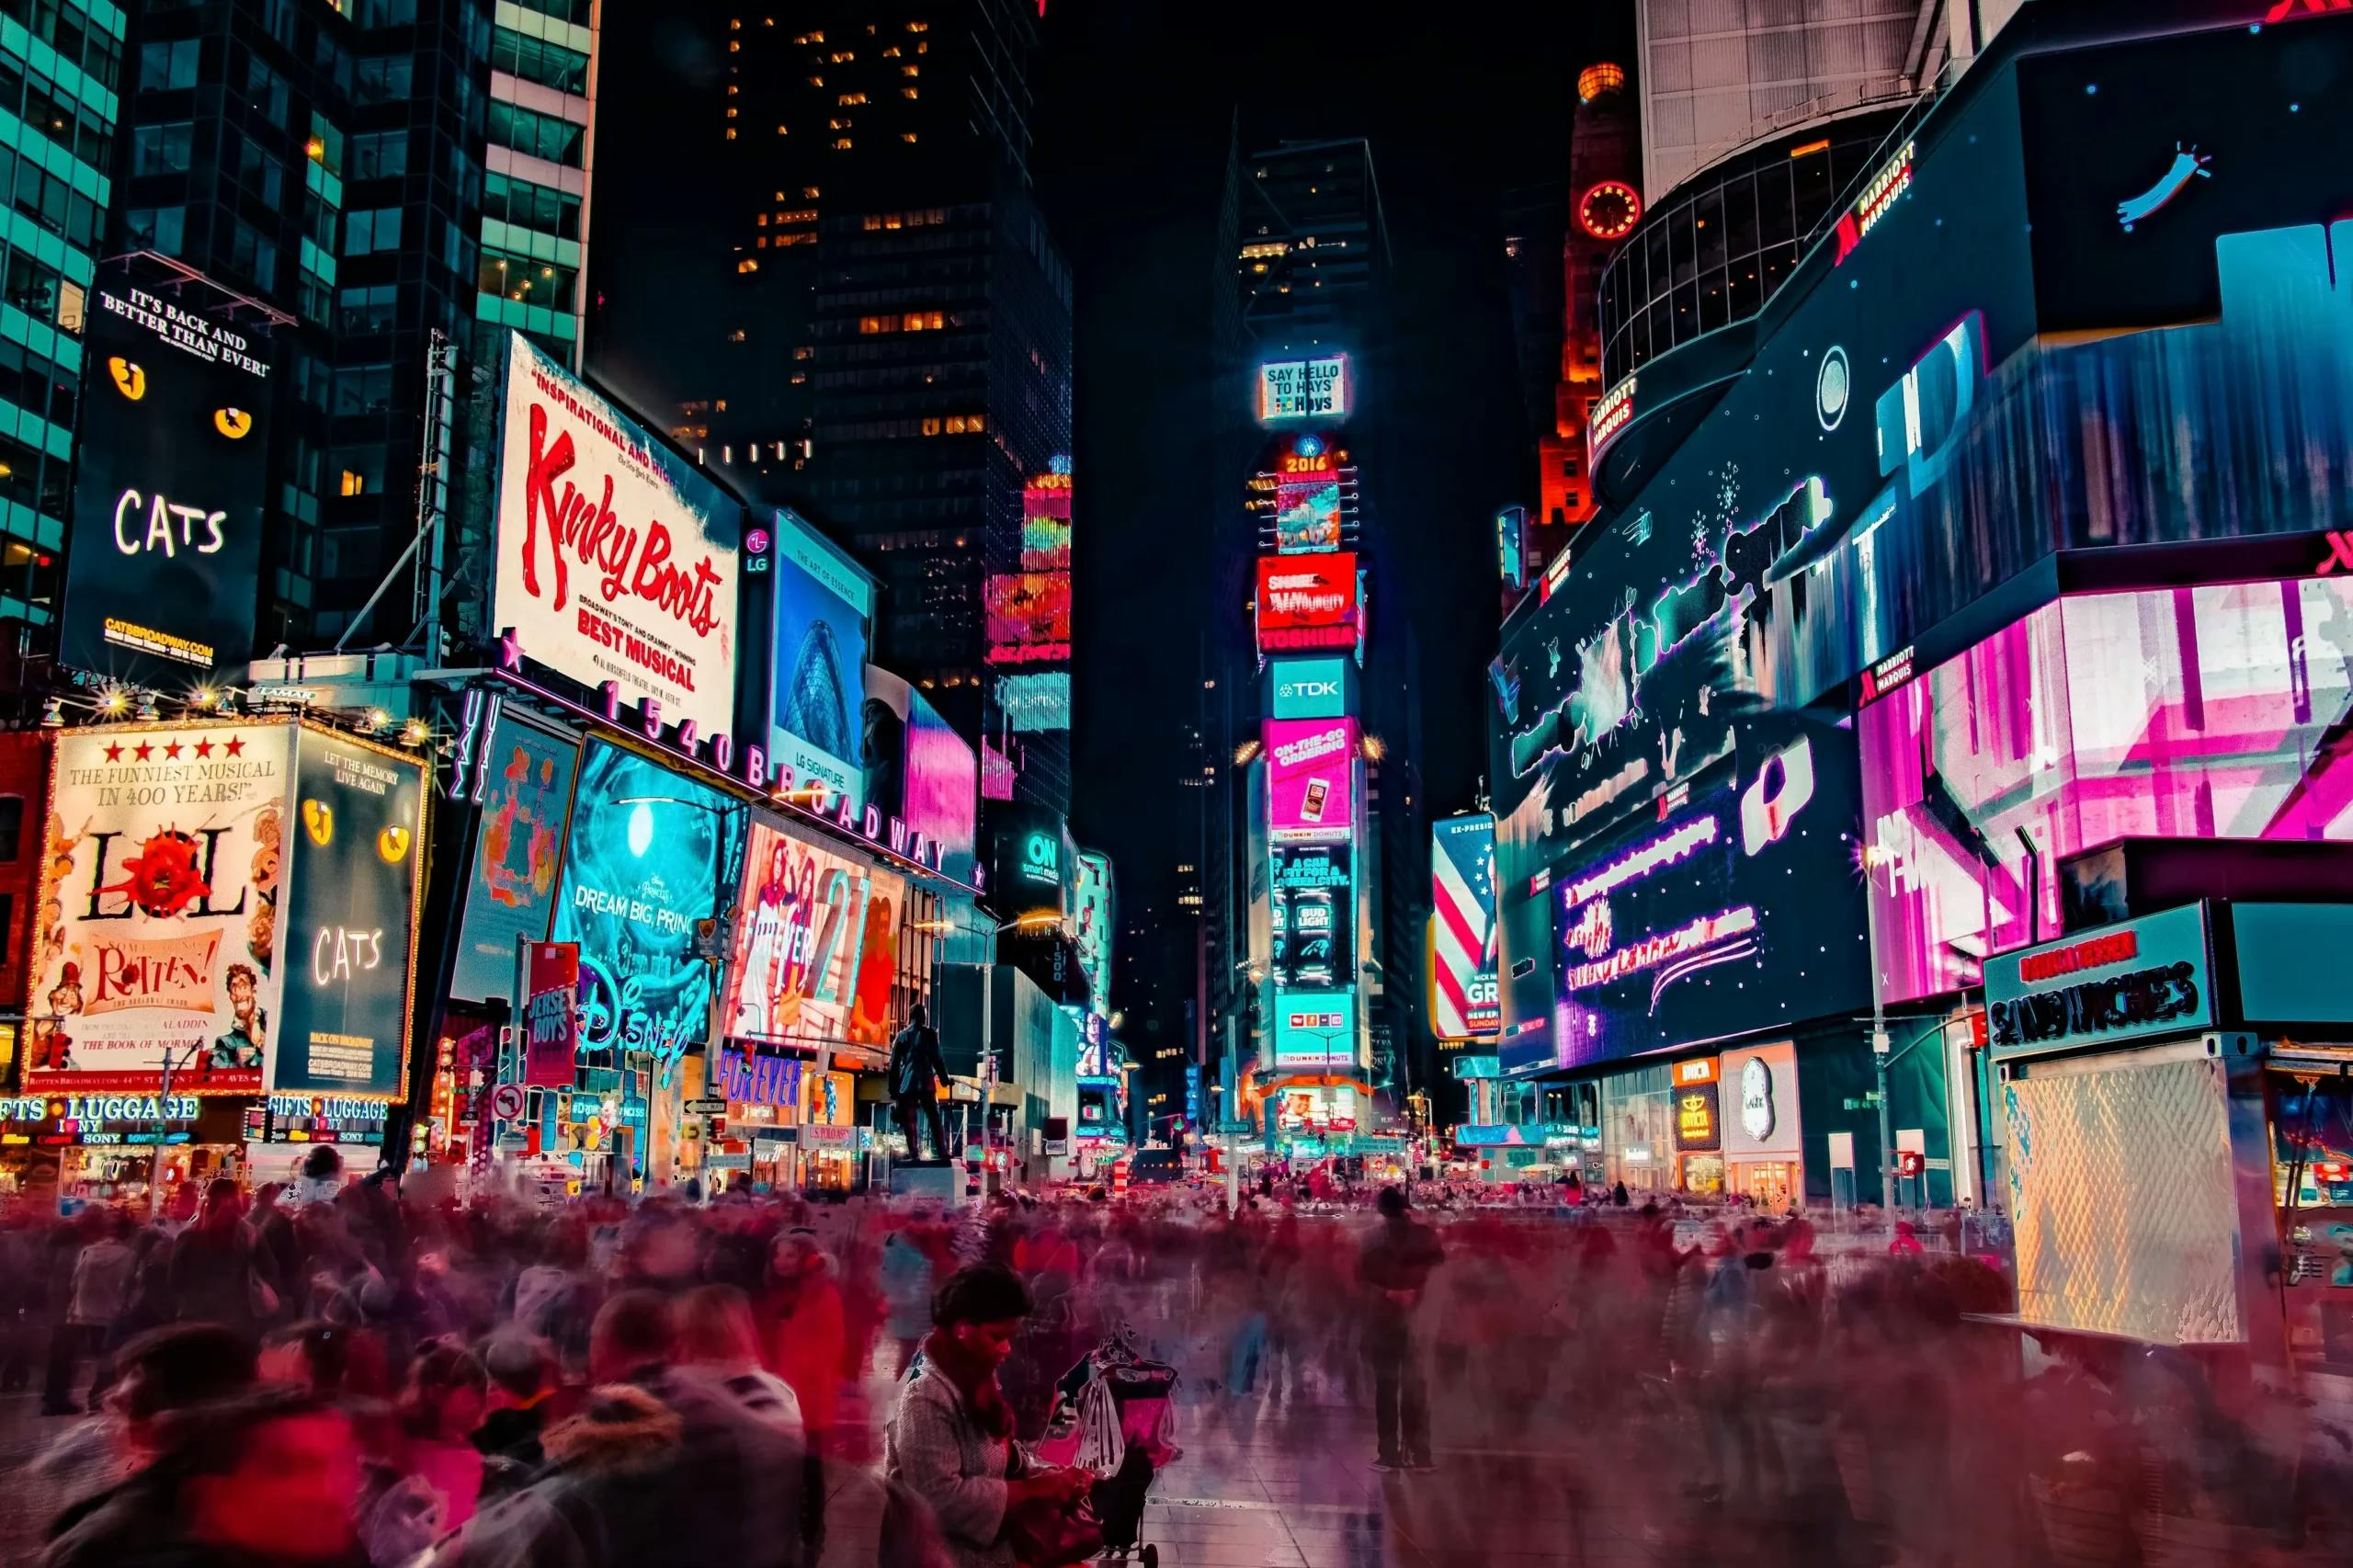 Vibrant night scene at Times Square with illuminated billboards for Broadway shows and a bustling crowd in motion